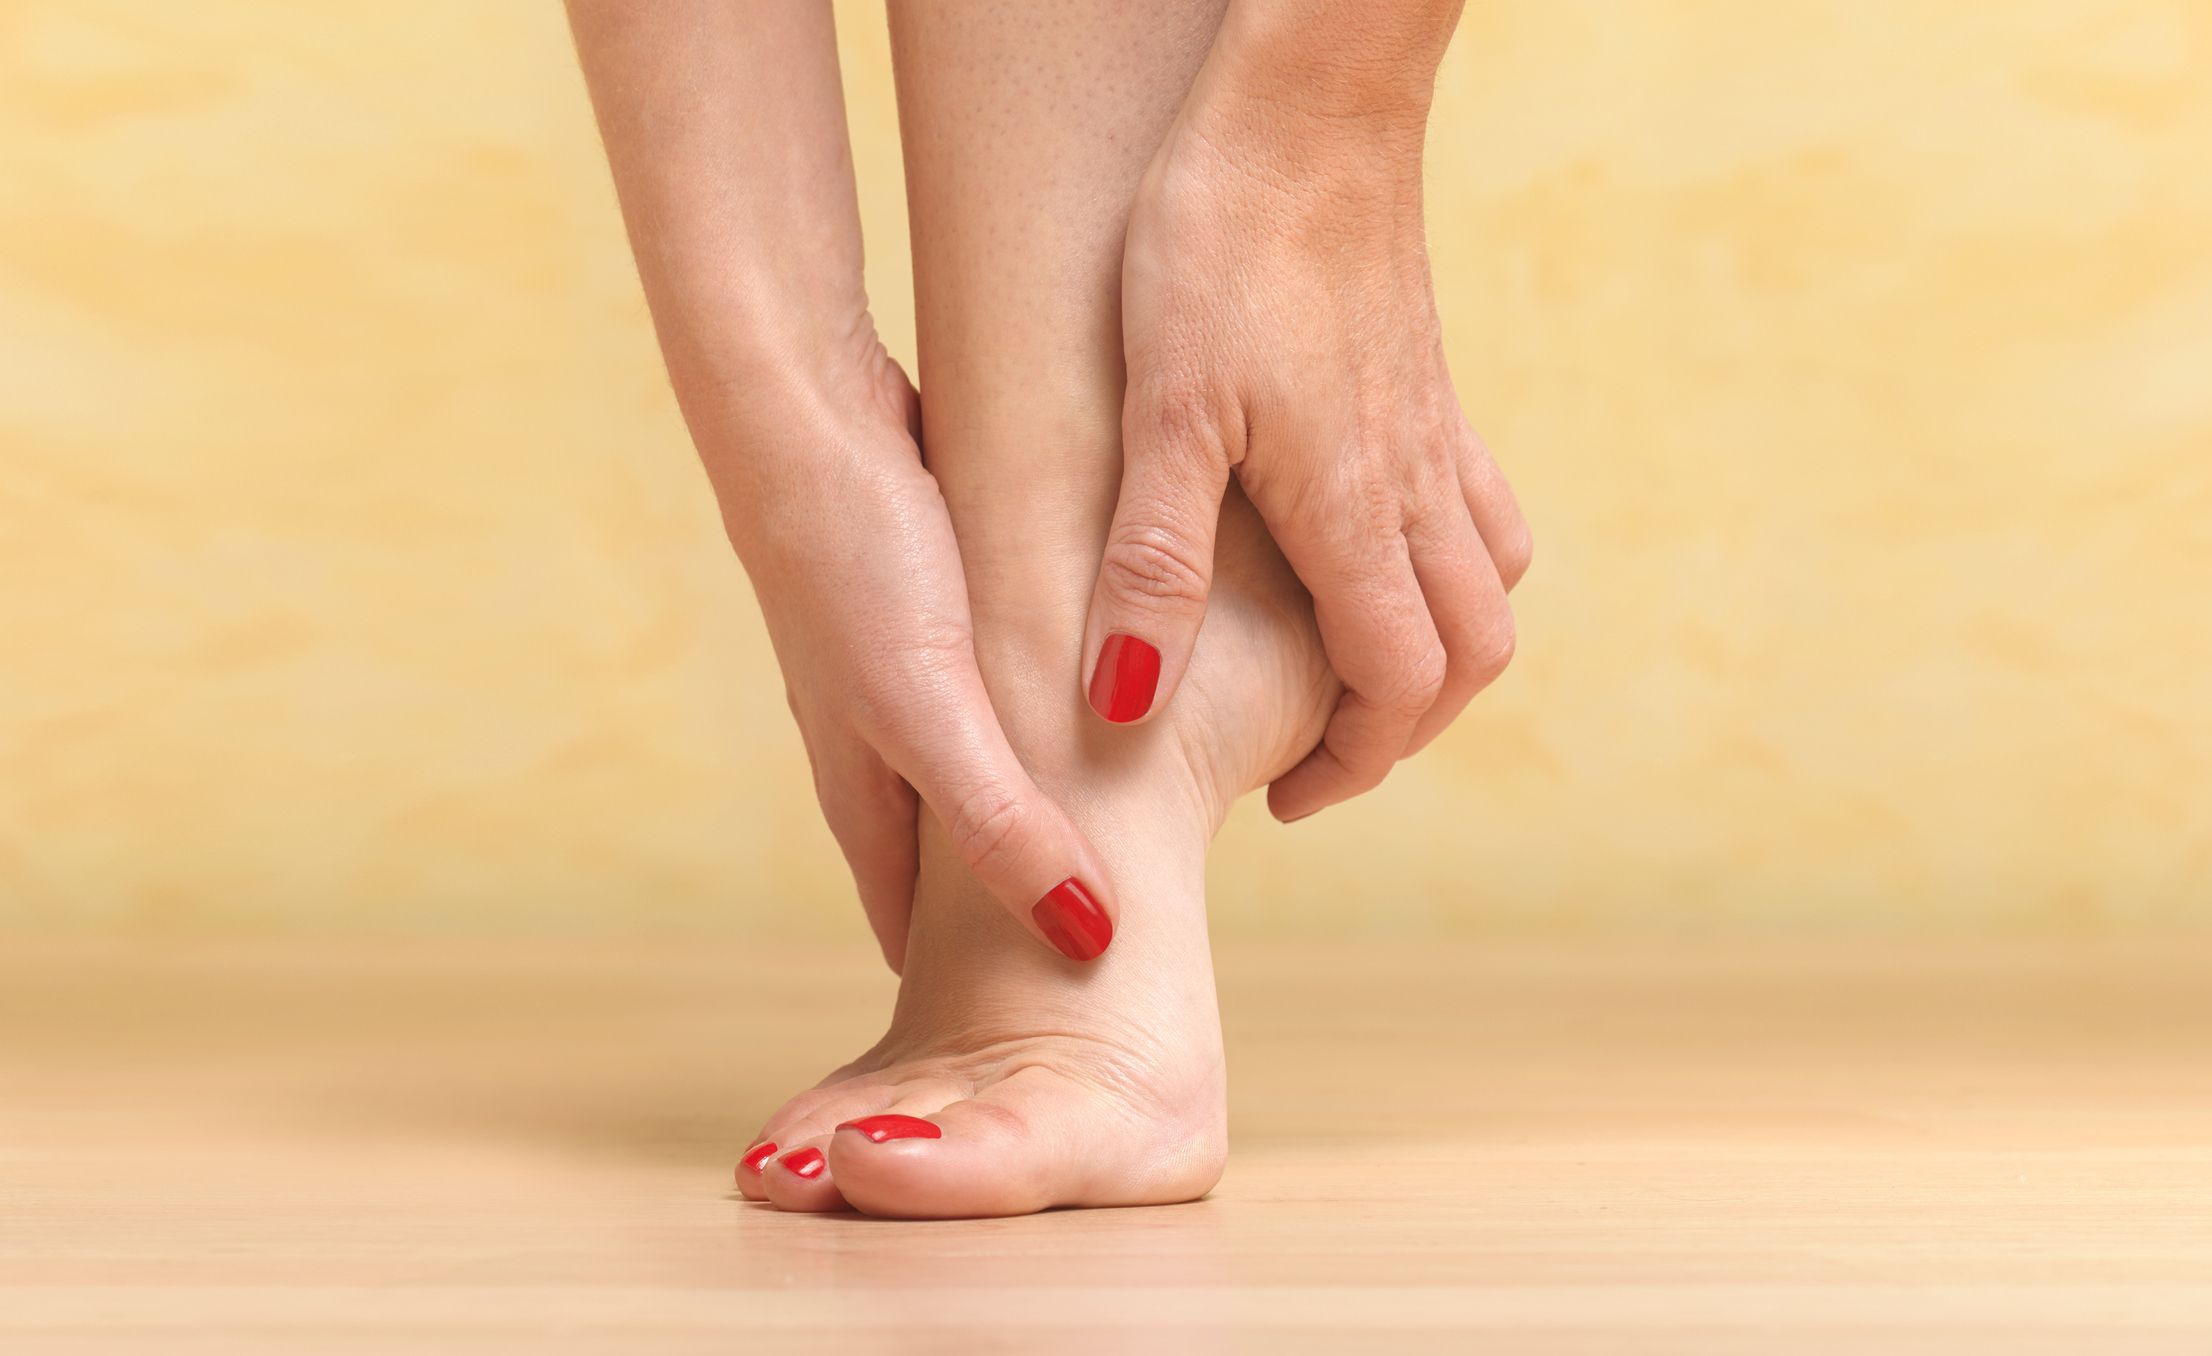 What Wearing High Heels Does To Your Feet | SELF